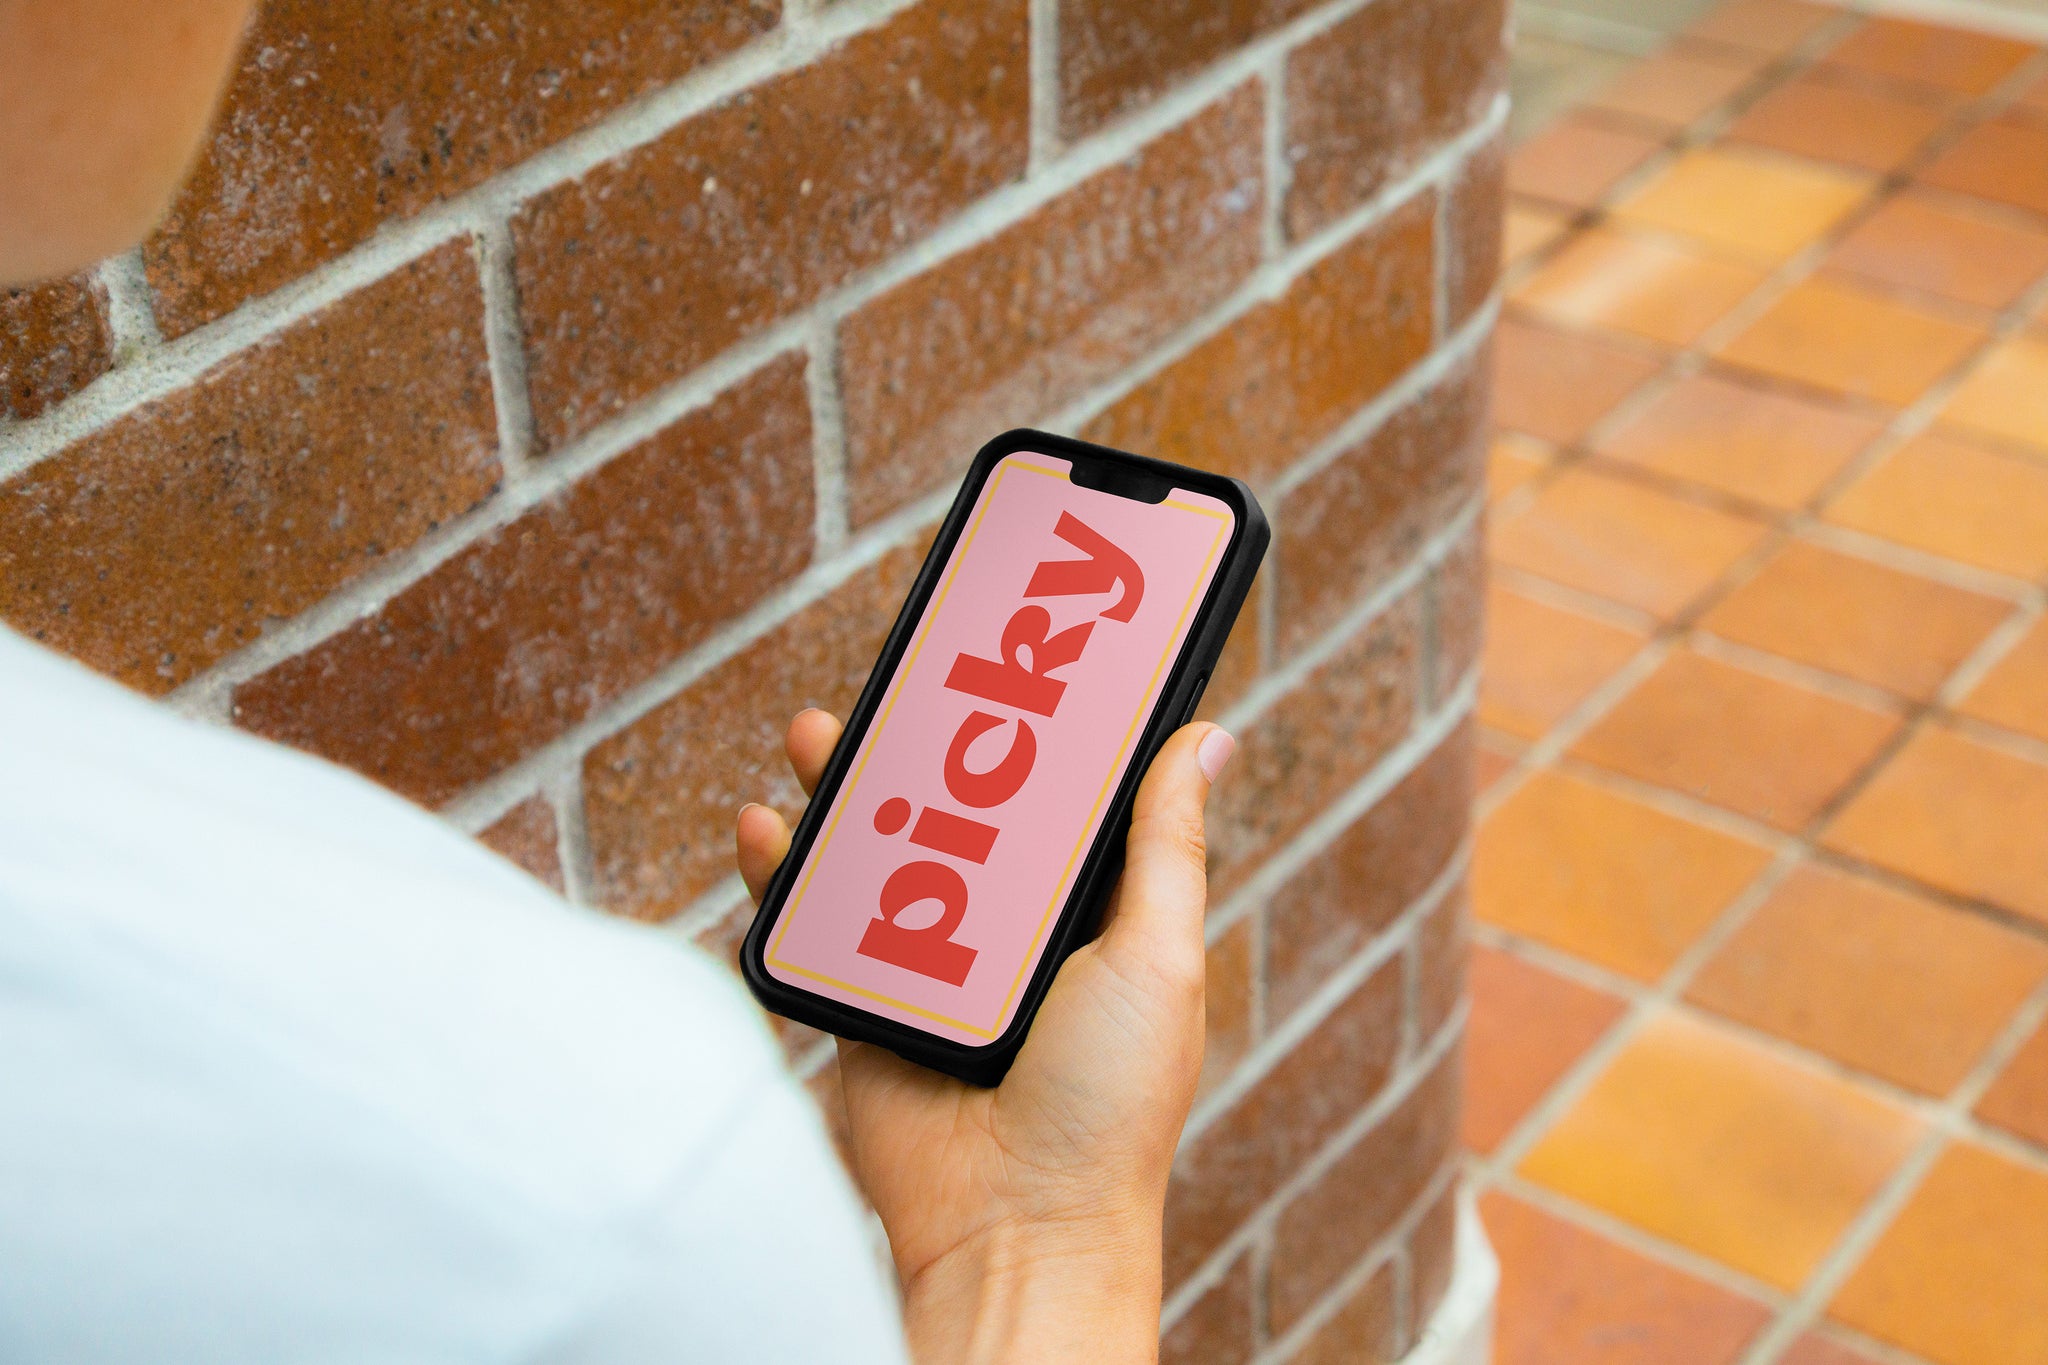 Lady holding smart phone standing against brick wall and path. Smartphone has screen turned on with Picky in red written vertically over pink screen. 